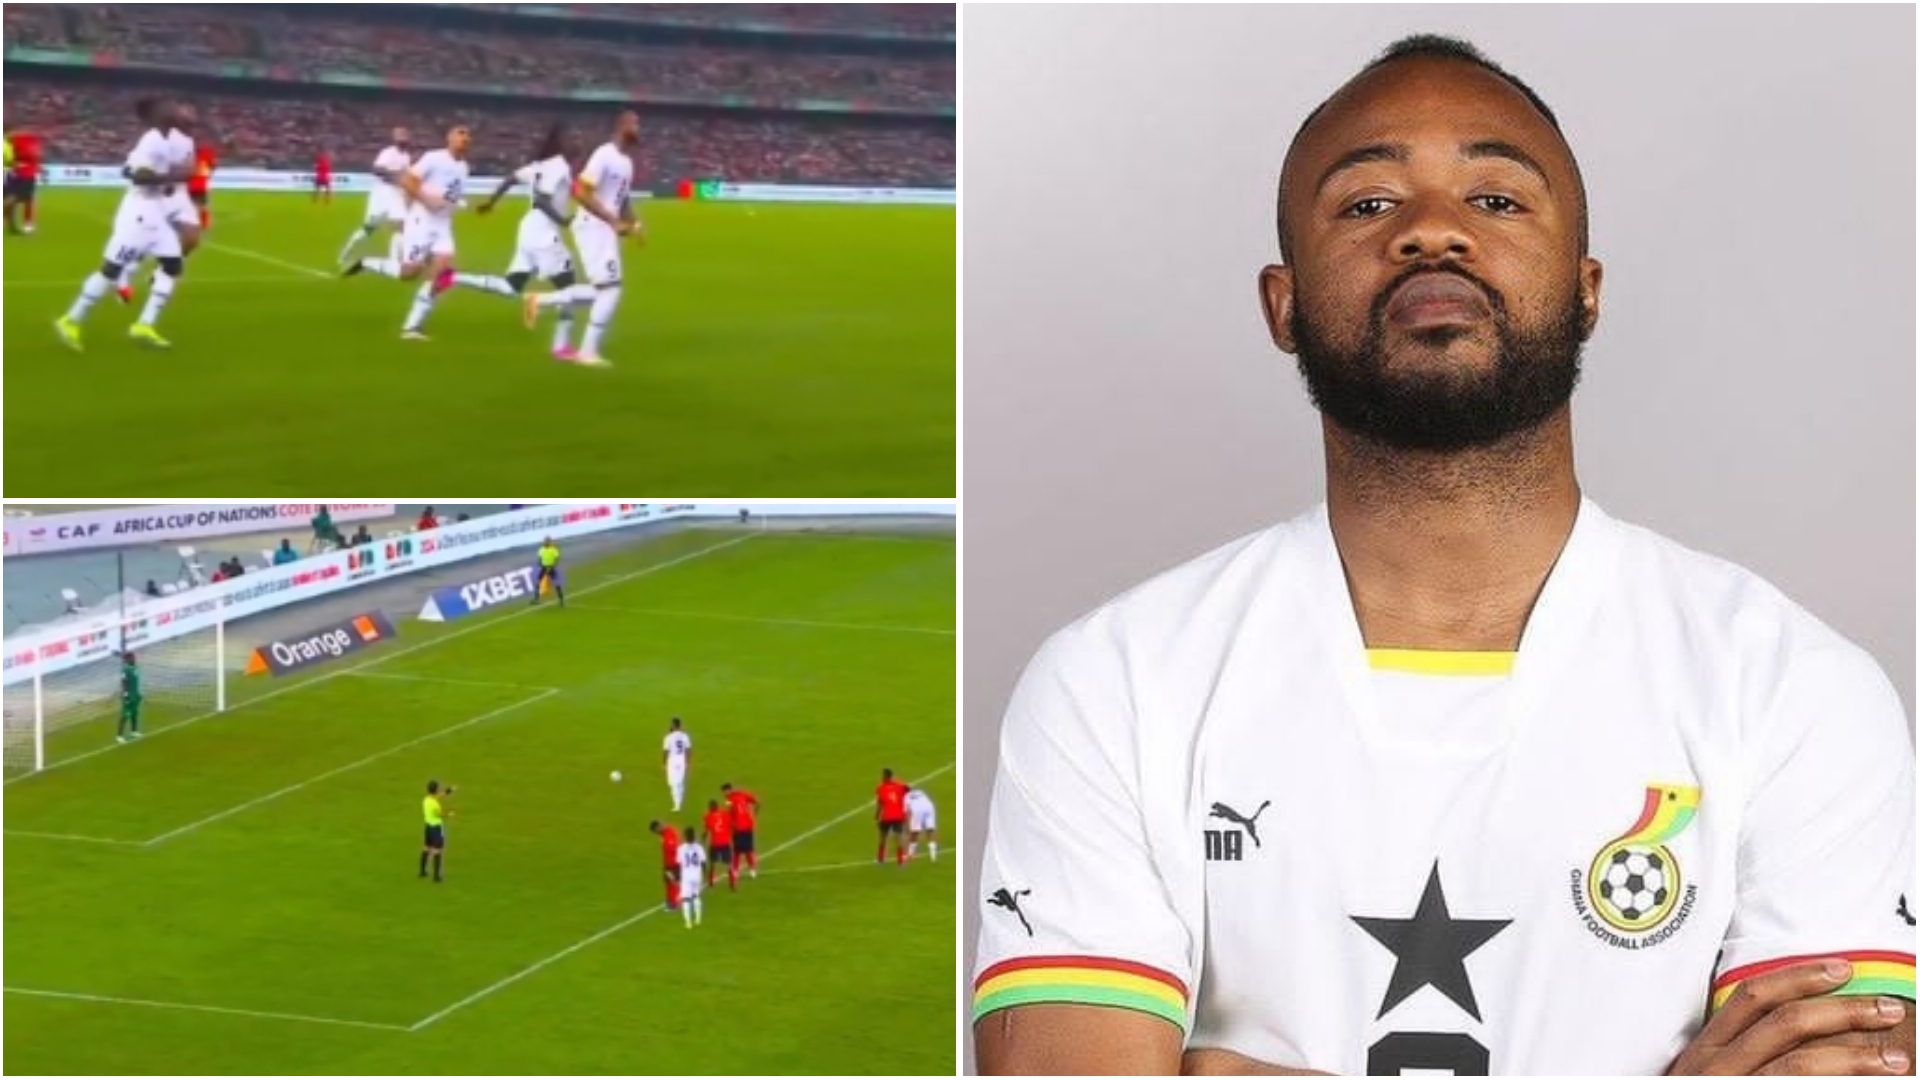 Video of Jordan Ayew's goal against Mozambique stirs reactions